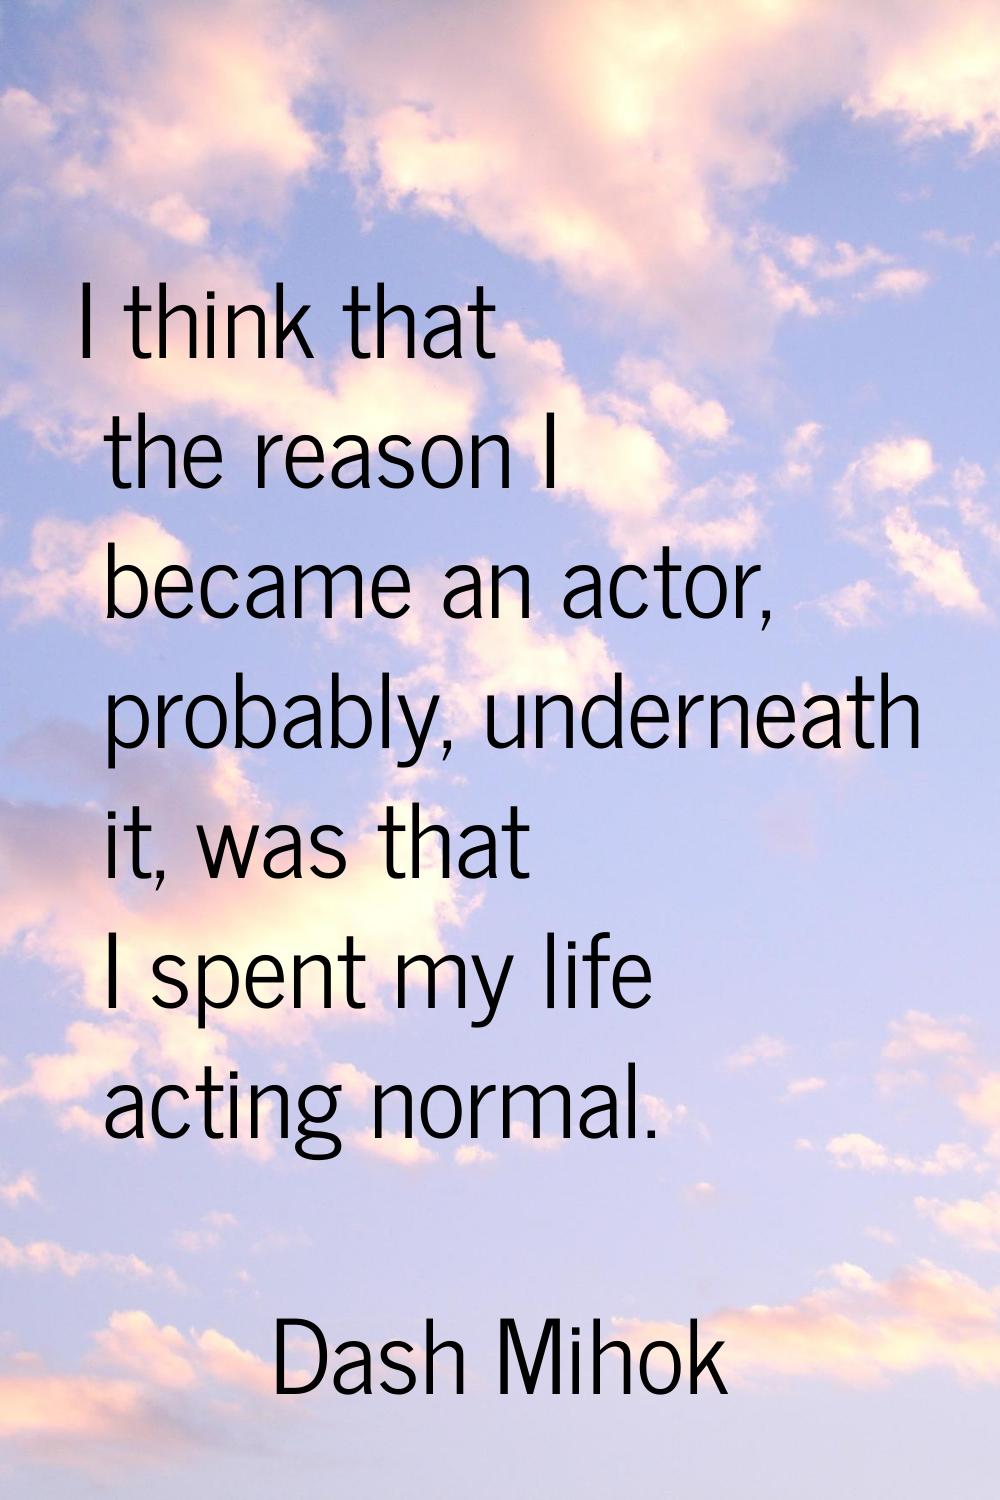 I think that the reason I became an actor, probably, underneath it, was that I spent my life acting